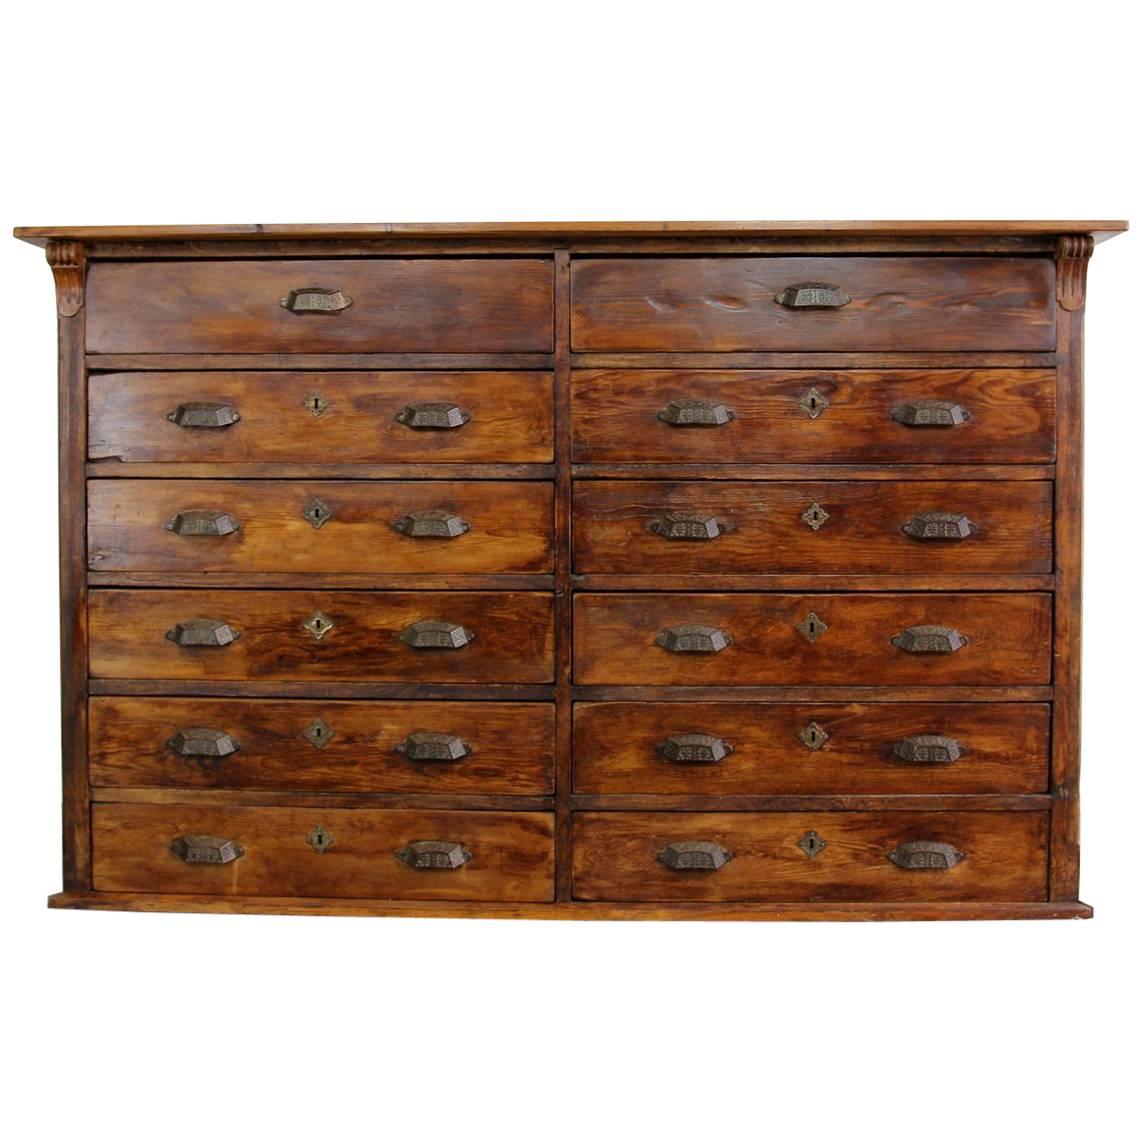 Early 20th Century French Apothecary Drawers, circa 1900